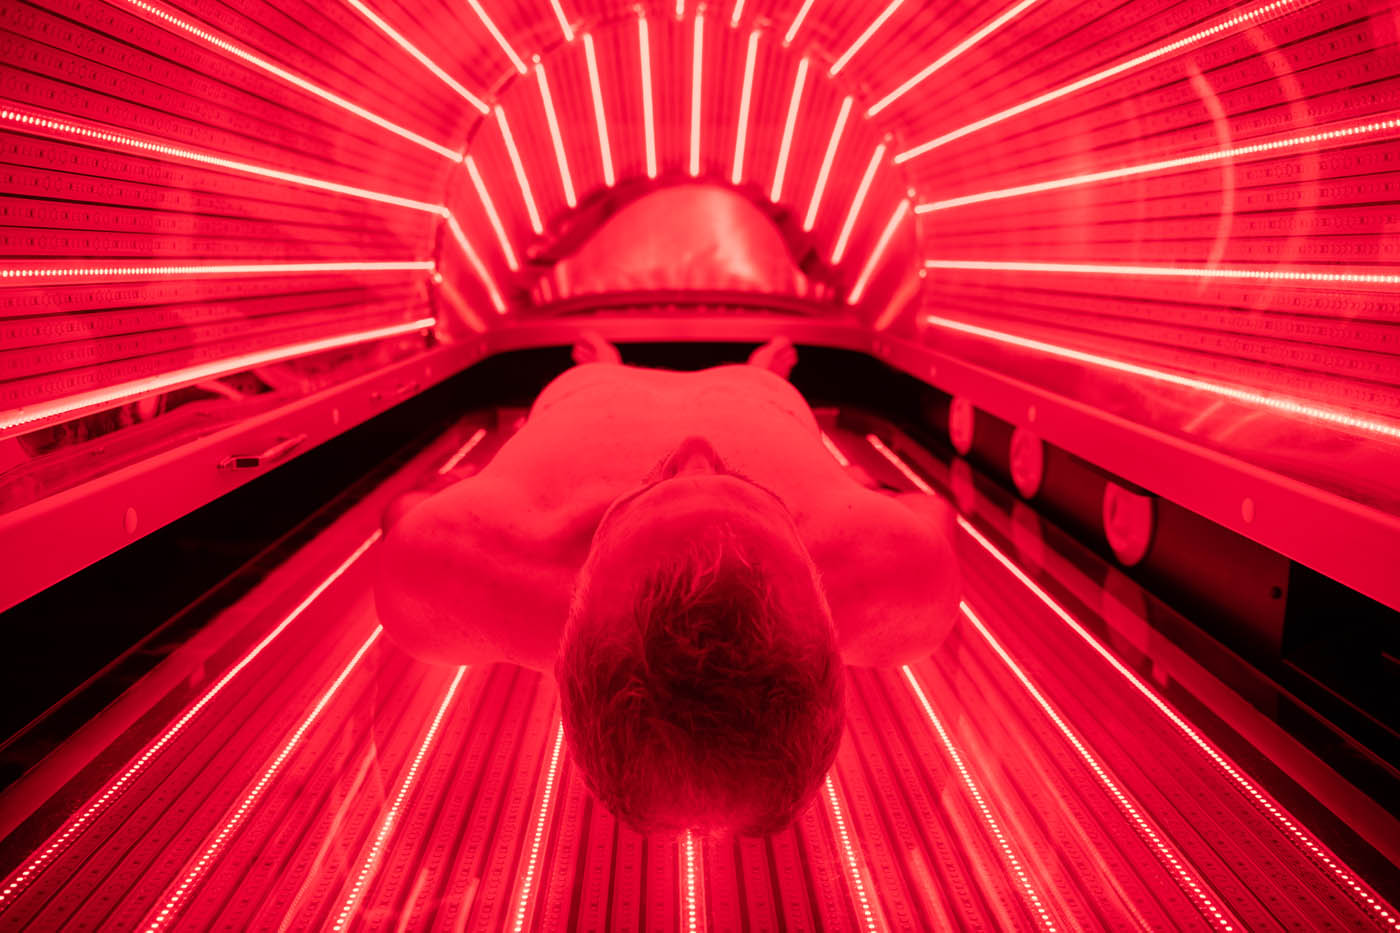 A man getting into a dark pod with bright red light, contact Light Lounge today for your infrared light therapy in Southlake.